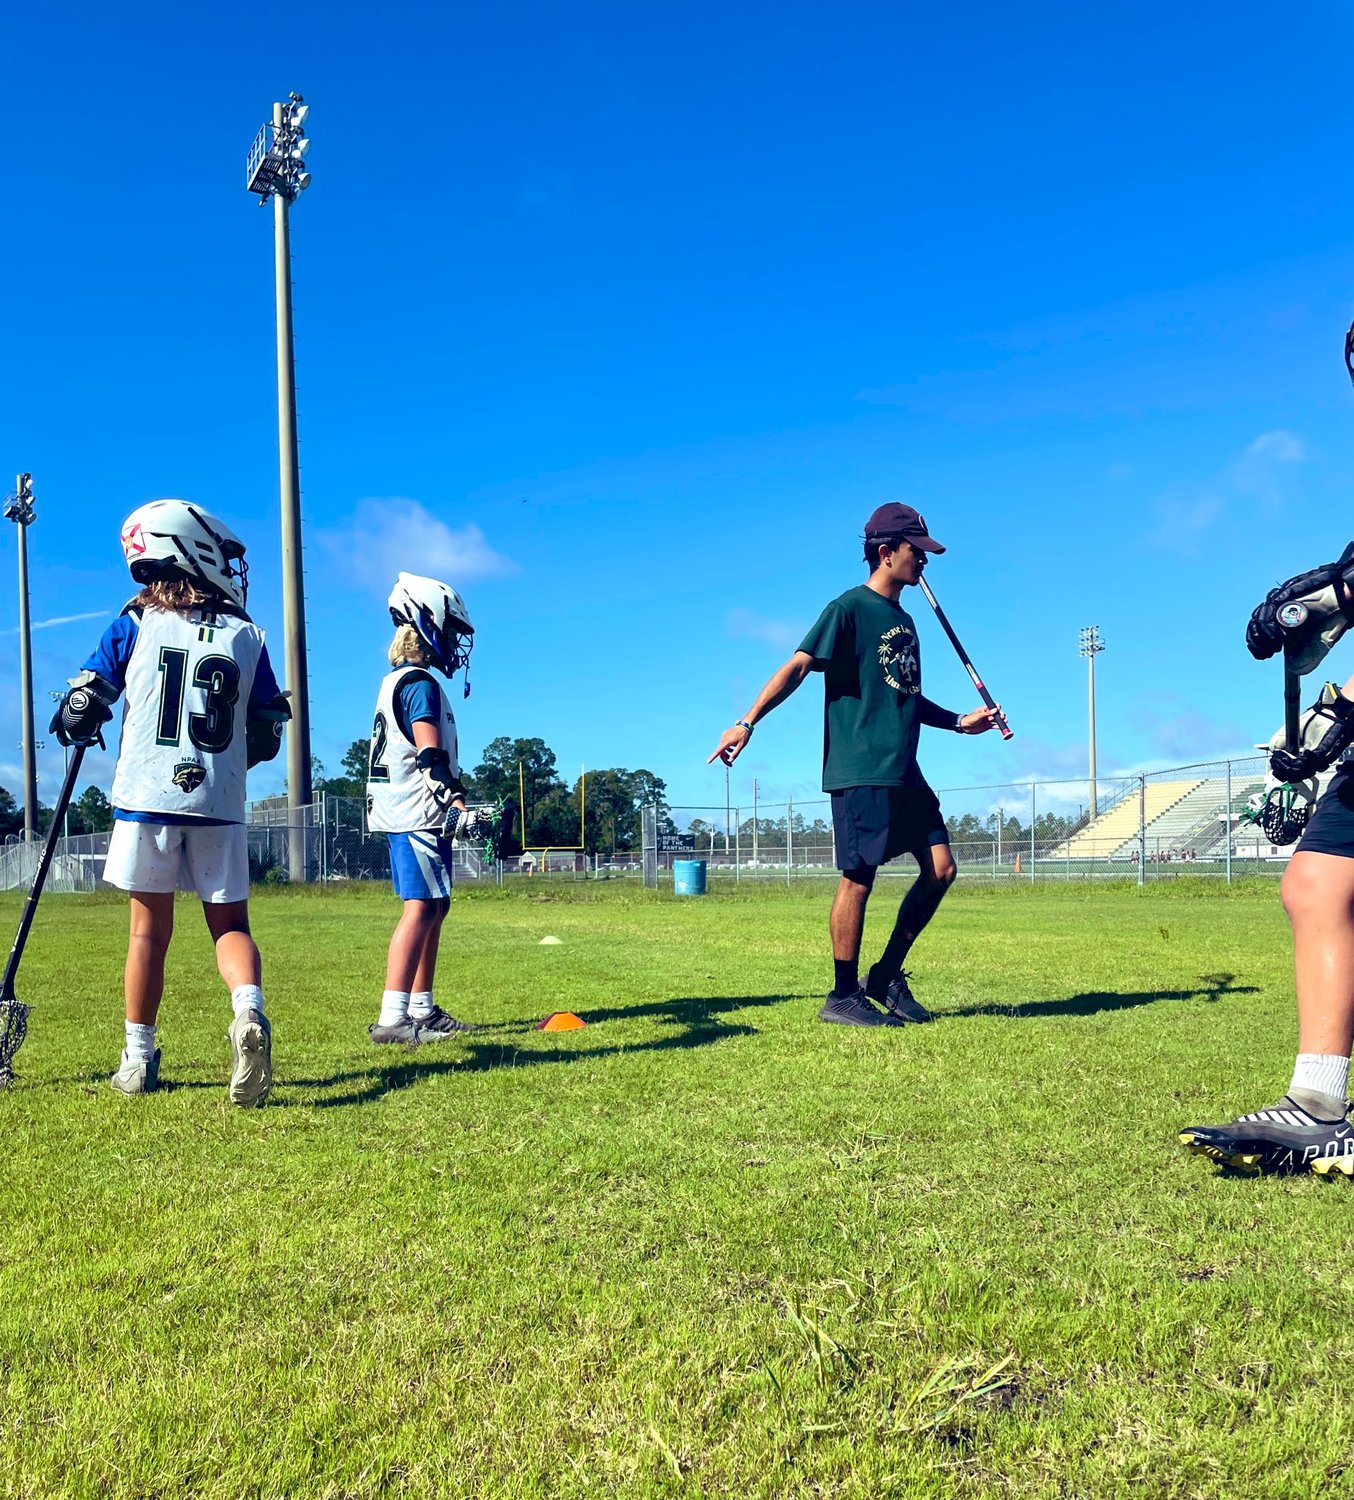 Current Nease boys lacrosse players served as instructors during the camp.